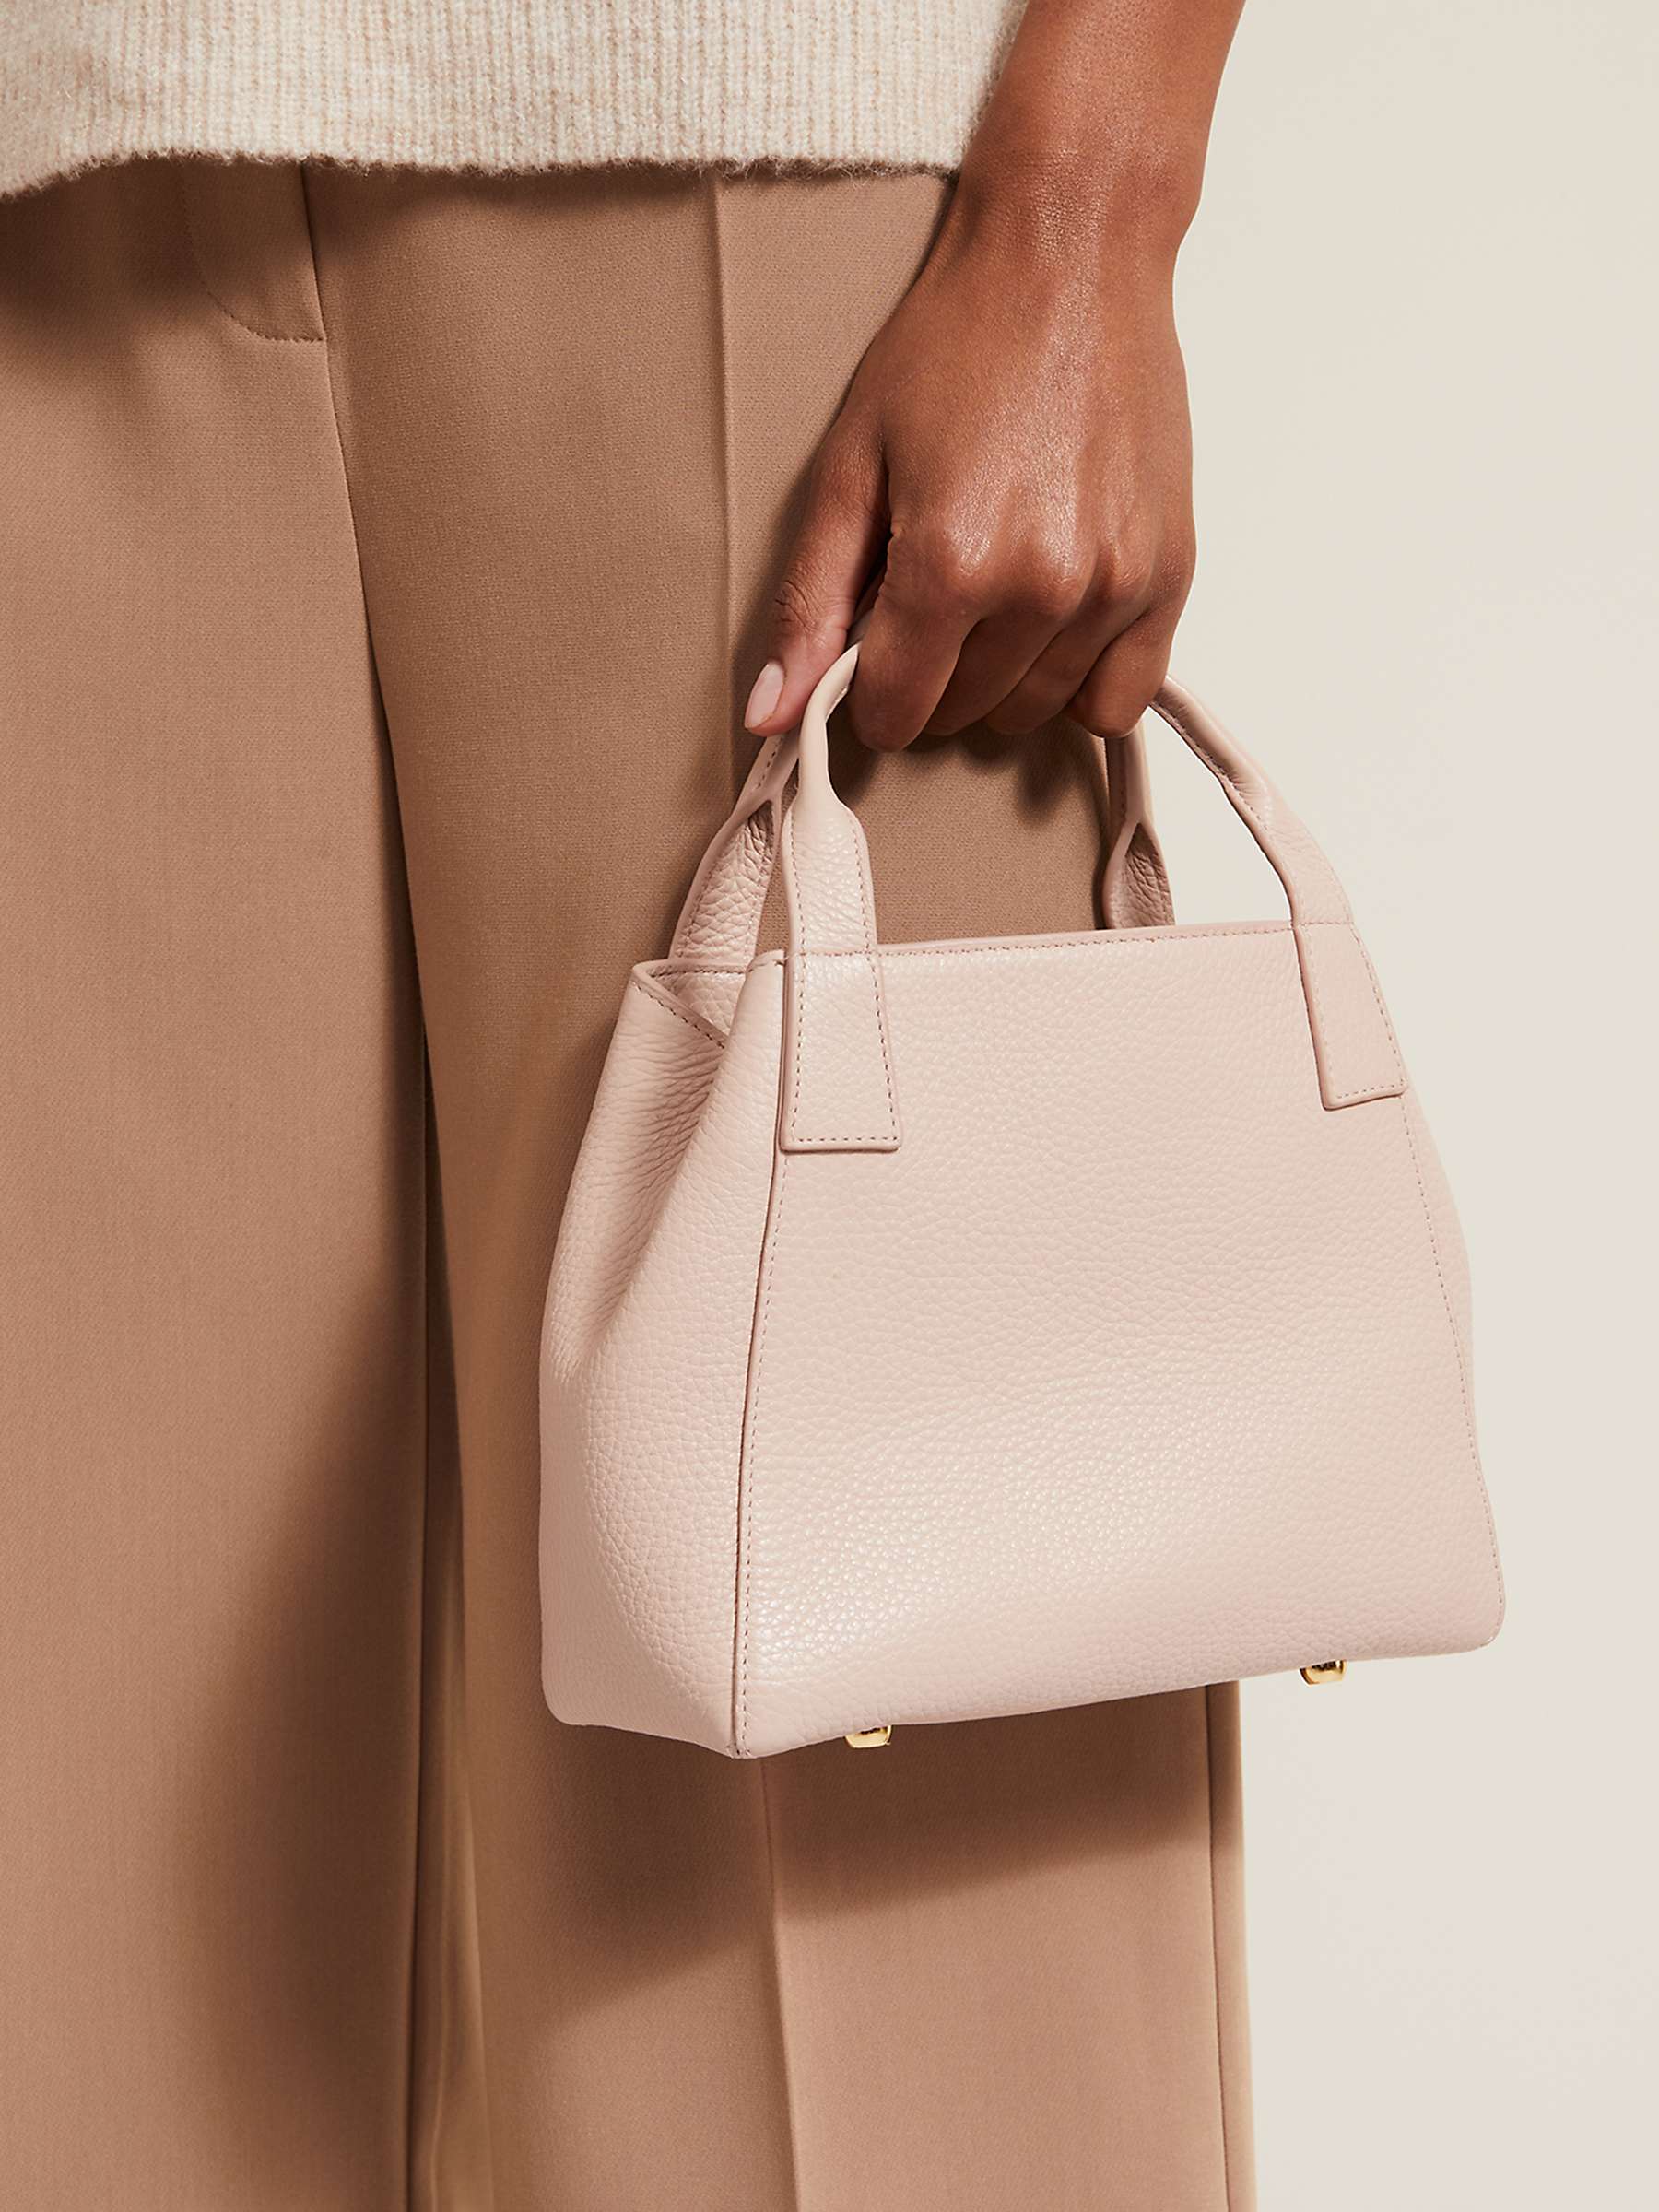 Buy Phase Eight Mini Leather Tote Bag, Pale Pink Online at johnlewis.com